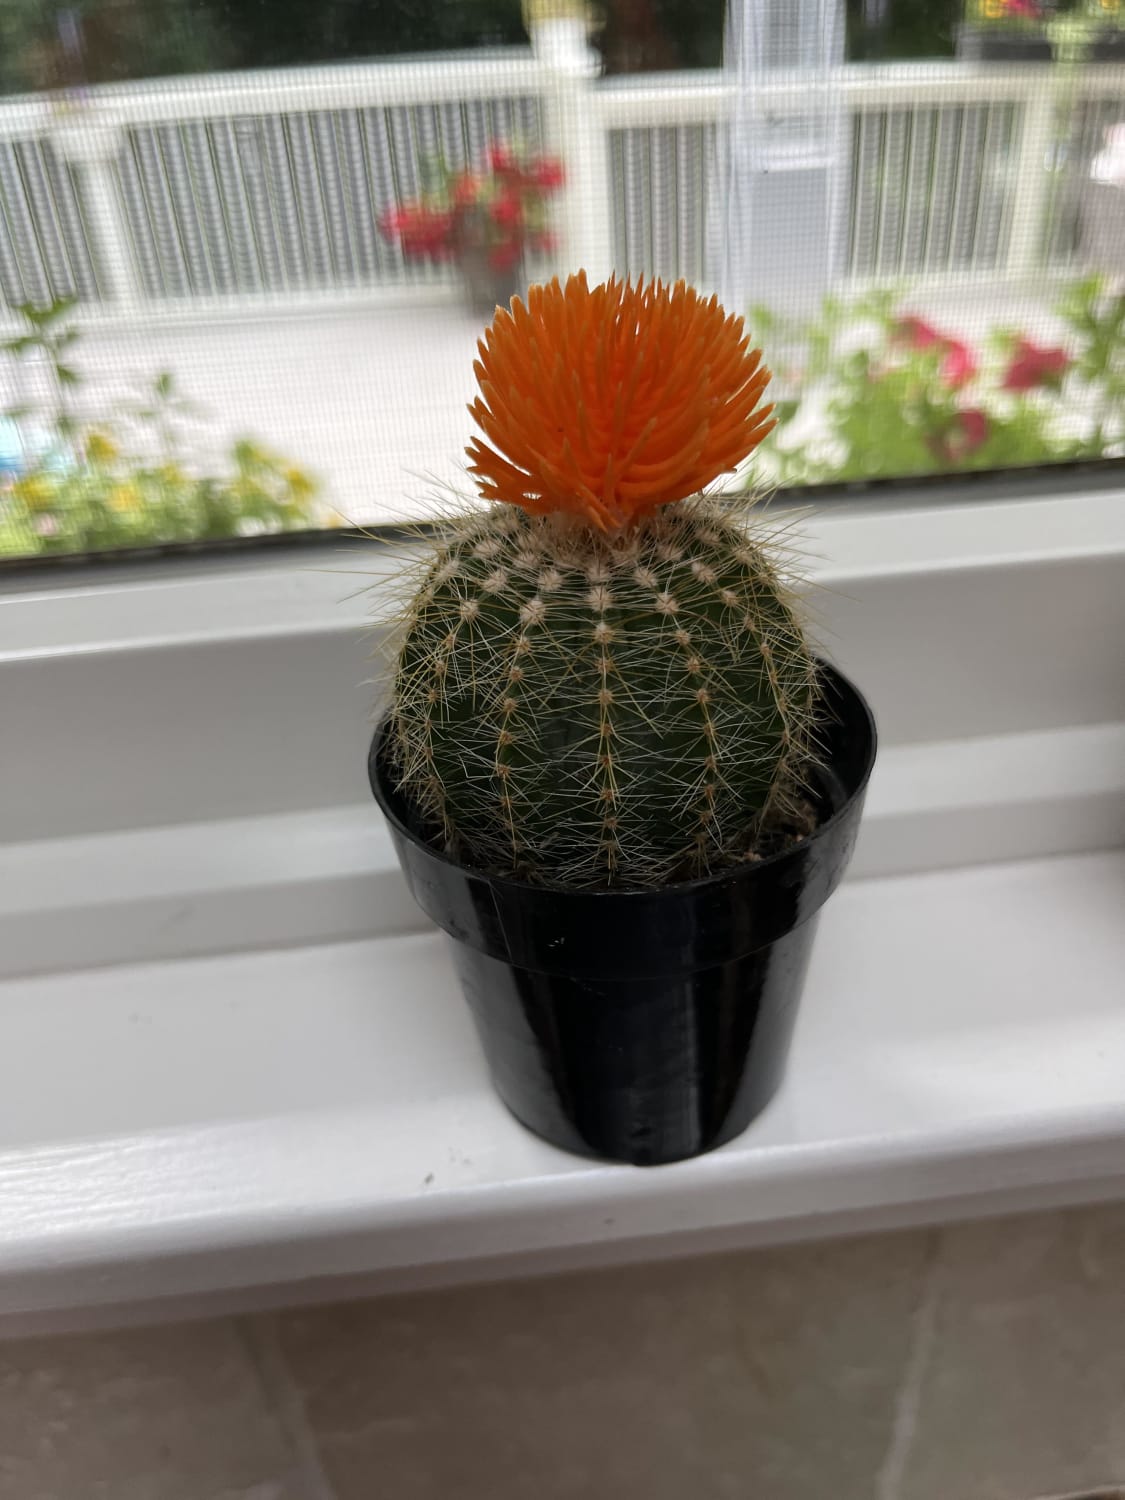 My mom suddenly passed away last week, and this was her mini cactus she had in the kitchen window. I want to keep it alive, but I have no idea how often to water it and if it needs anything else like a specific amount of sunlight or something